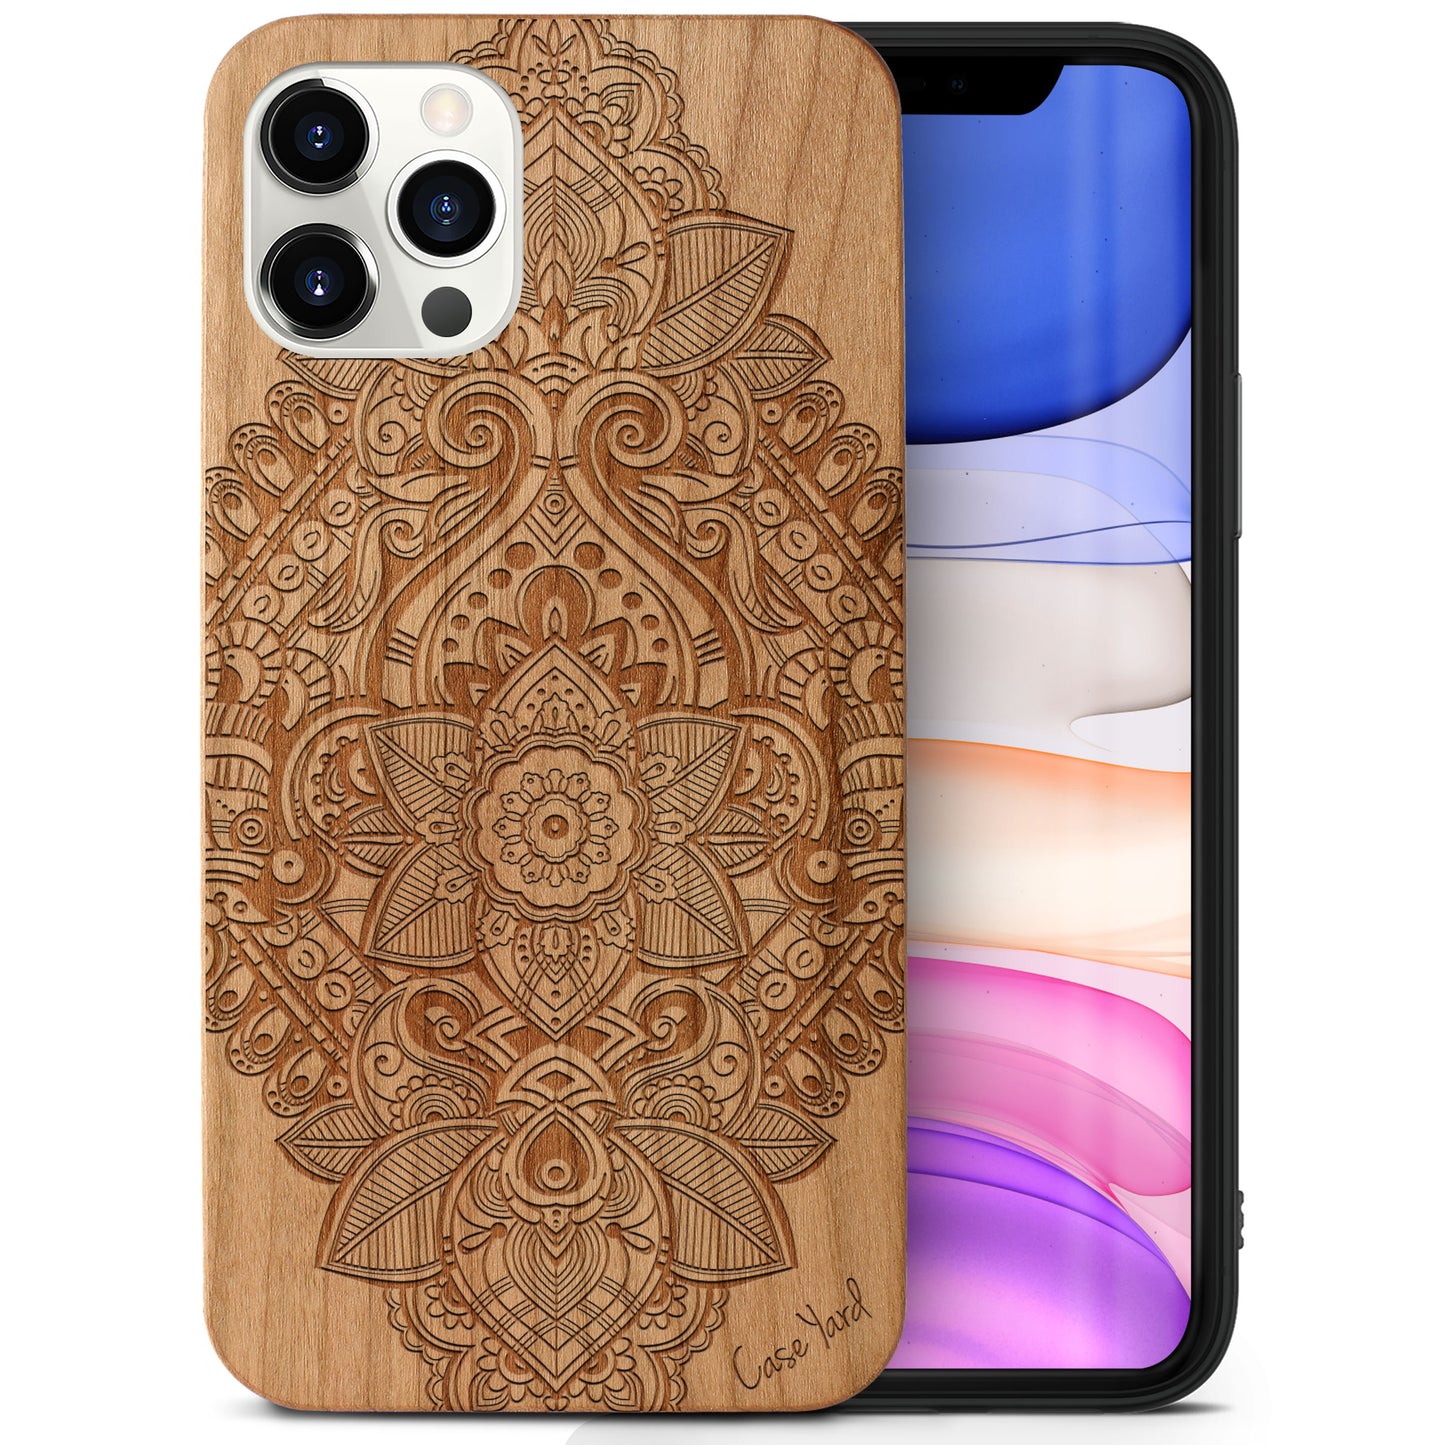 Wooden Cell Phone Case Cover, Laser Engraved case for iPhone & Samsung phone Bohemian Flower Design